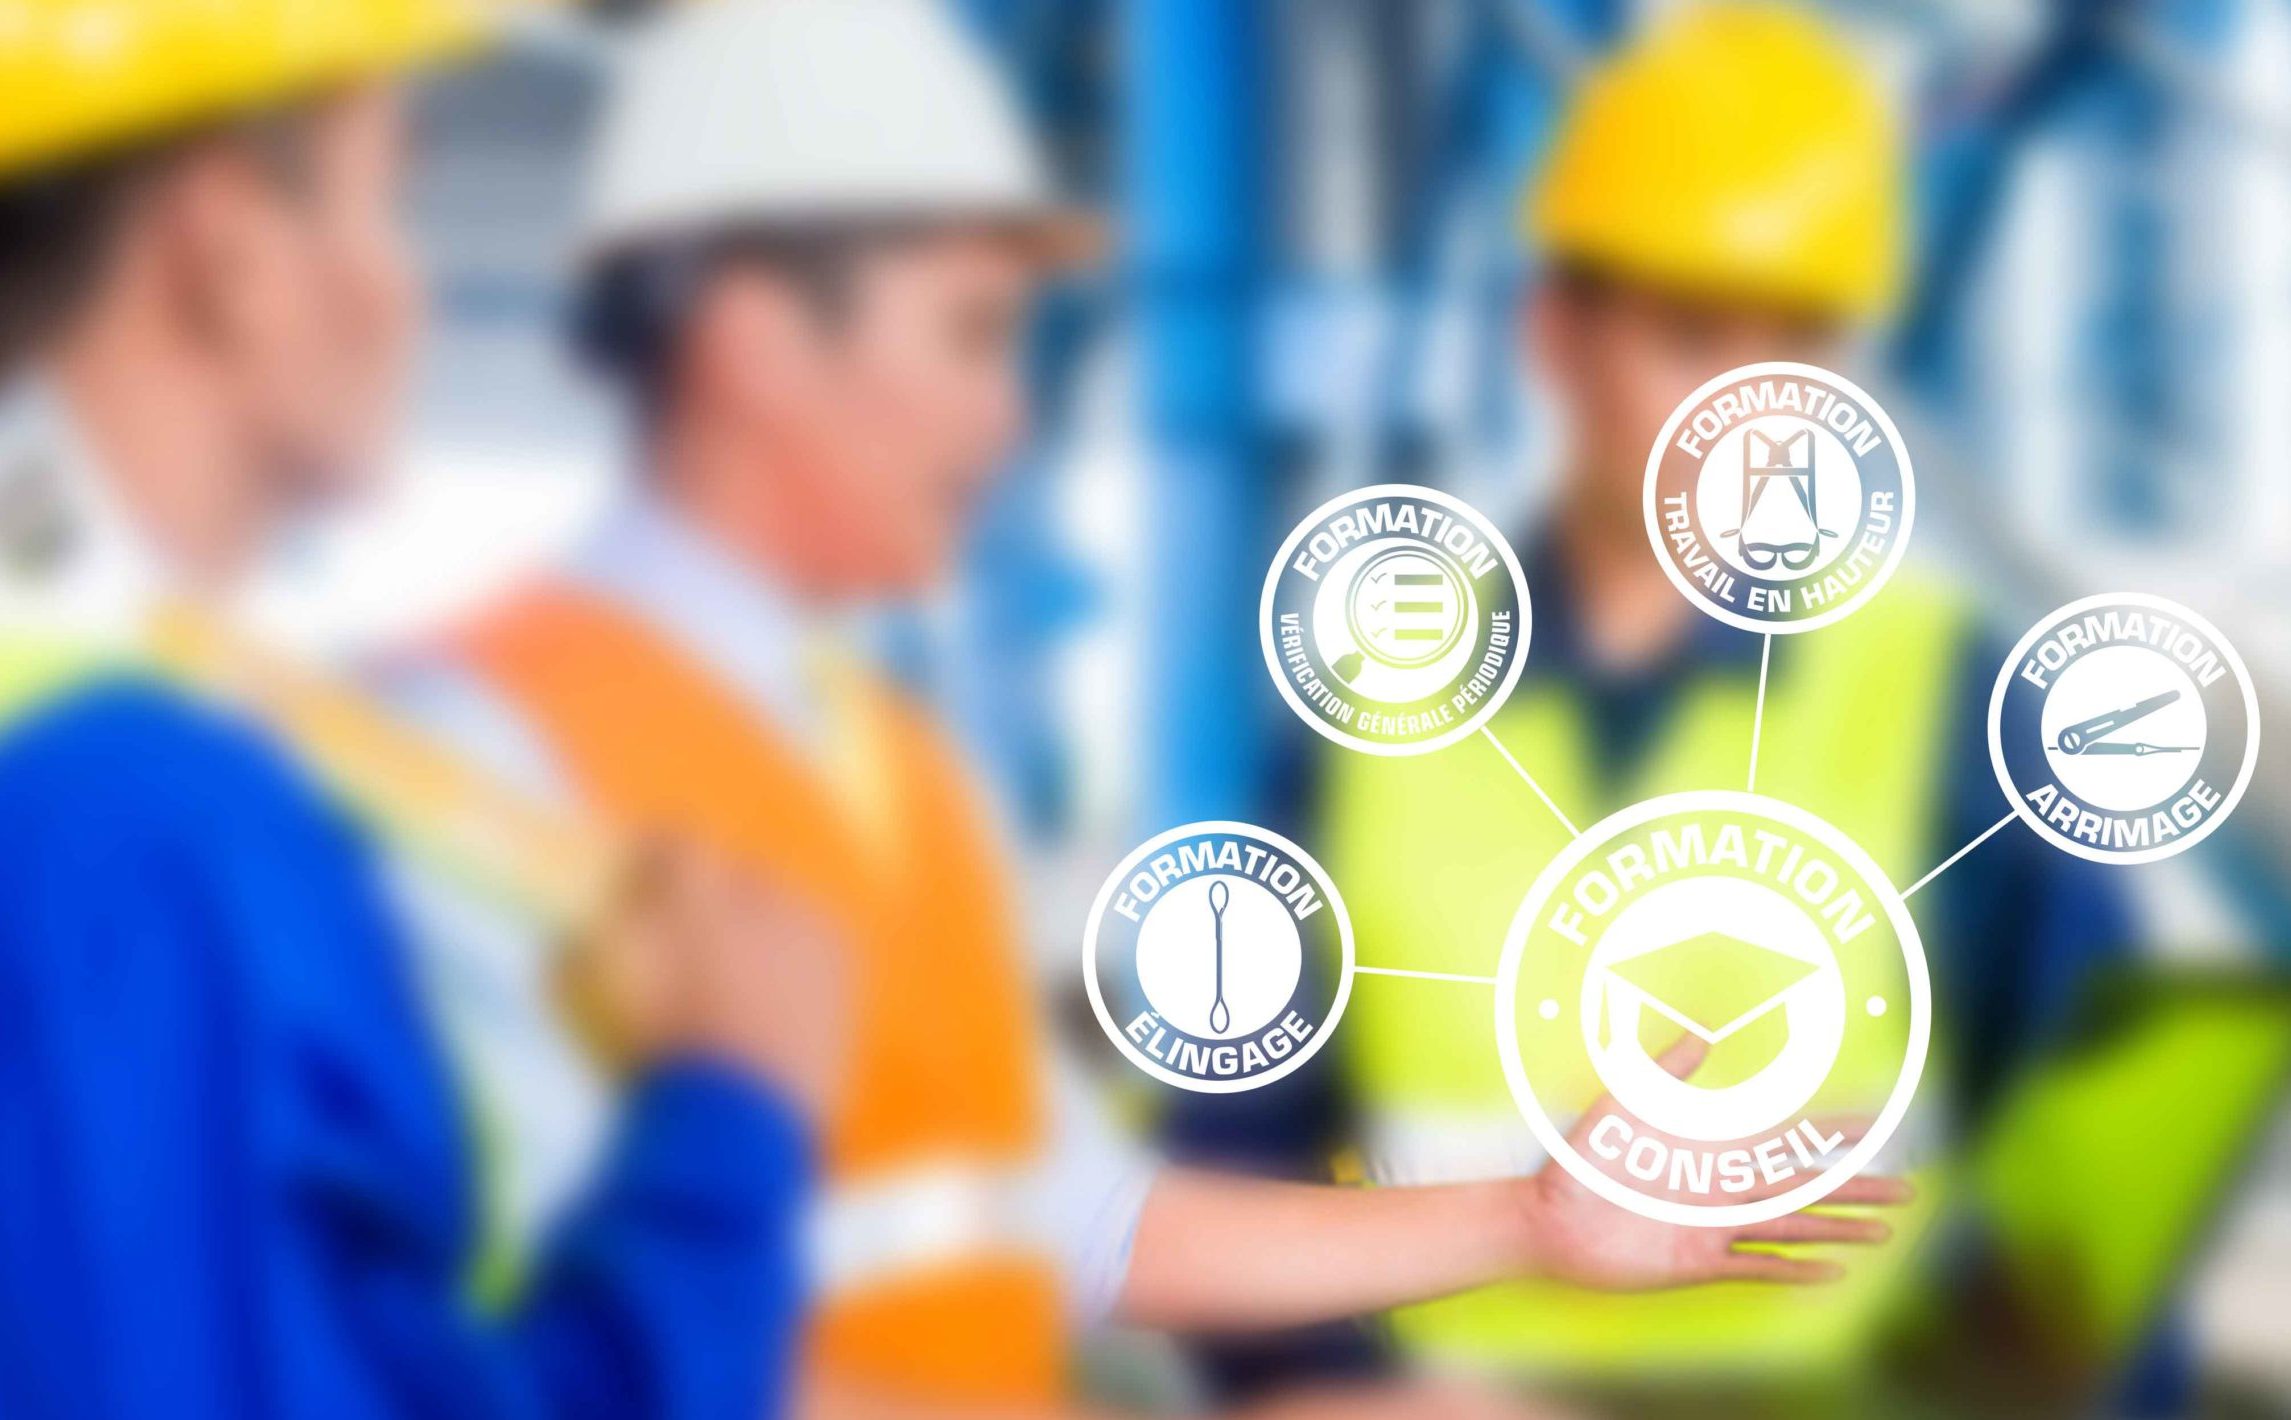 5 training pictograms in the foreground at the bottom right with 3 construction workers in the blurred background